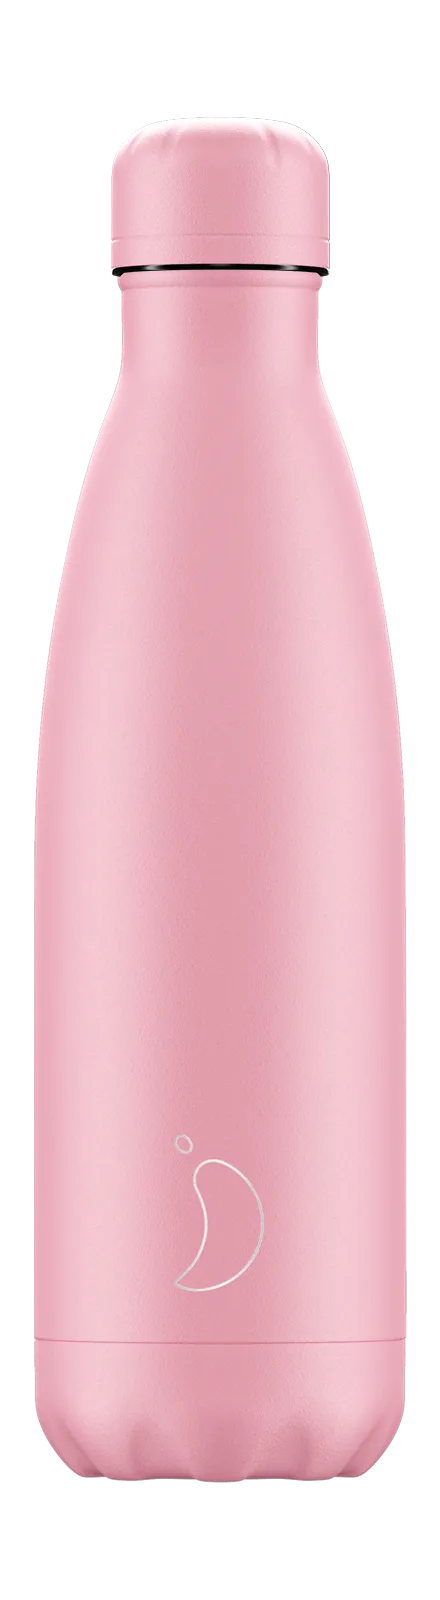 Chilly Bottle - All Pastel Edition - 500ml